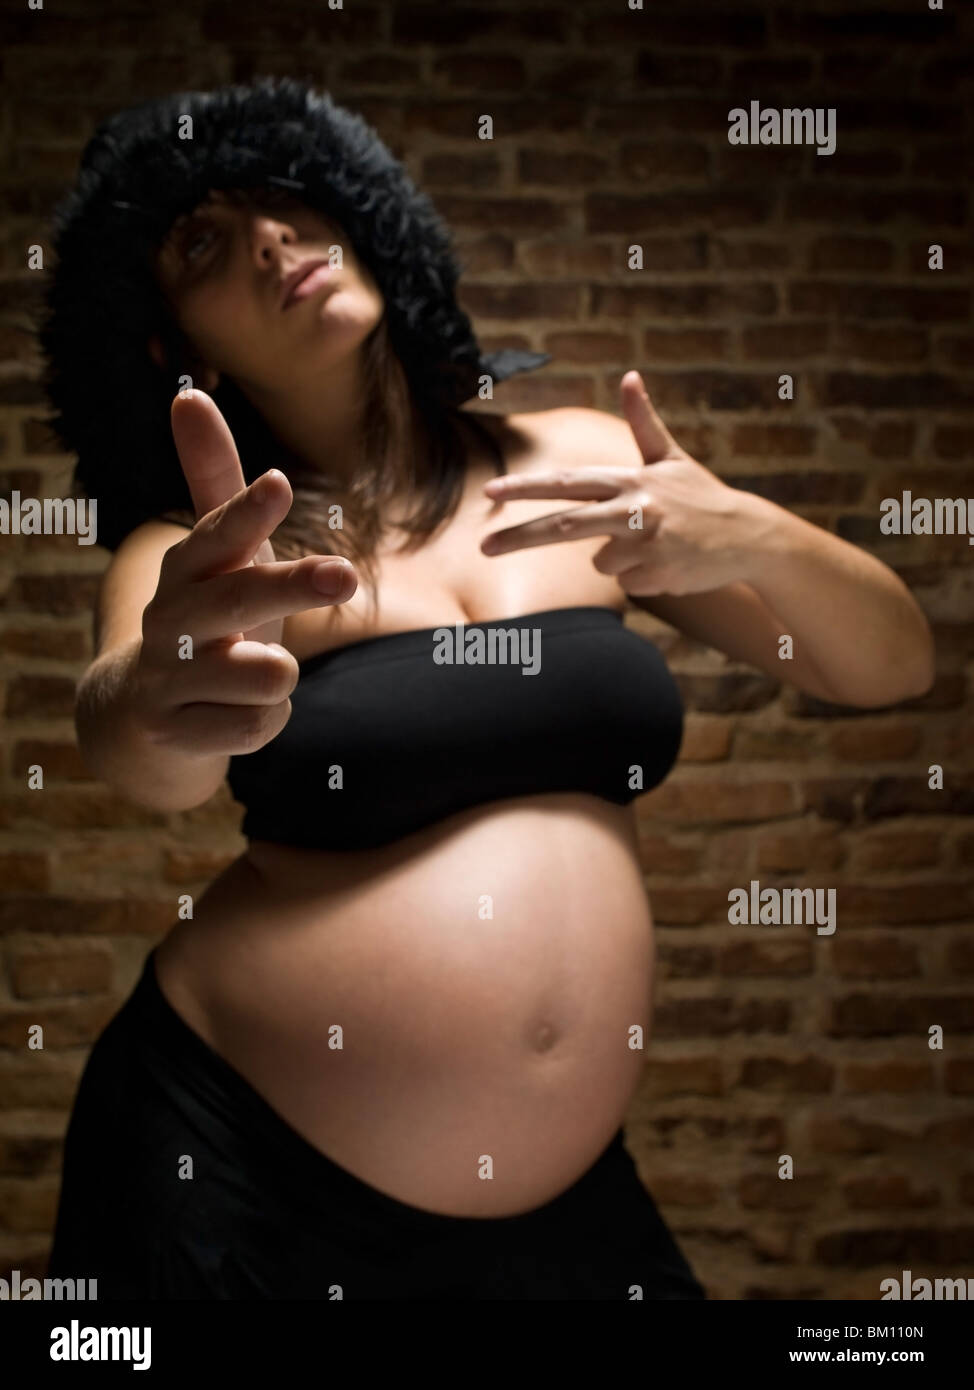 A young pregnant woman gesturing as she was armed. Focus on the hand. Stock Photo